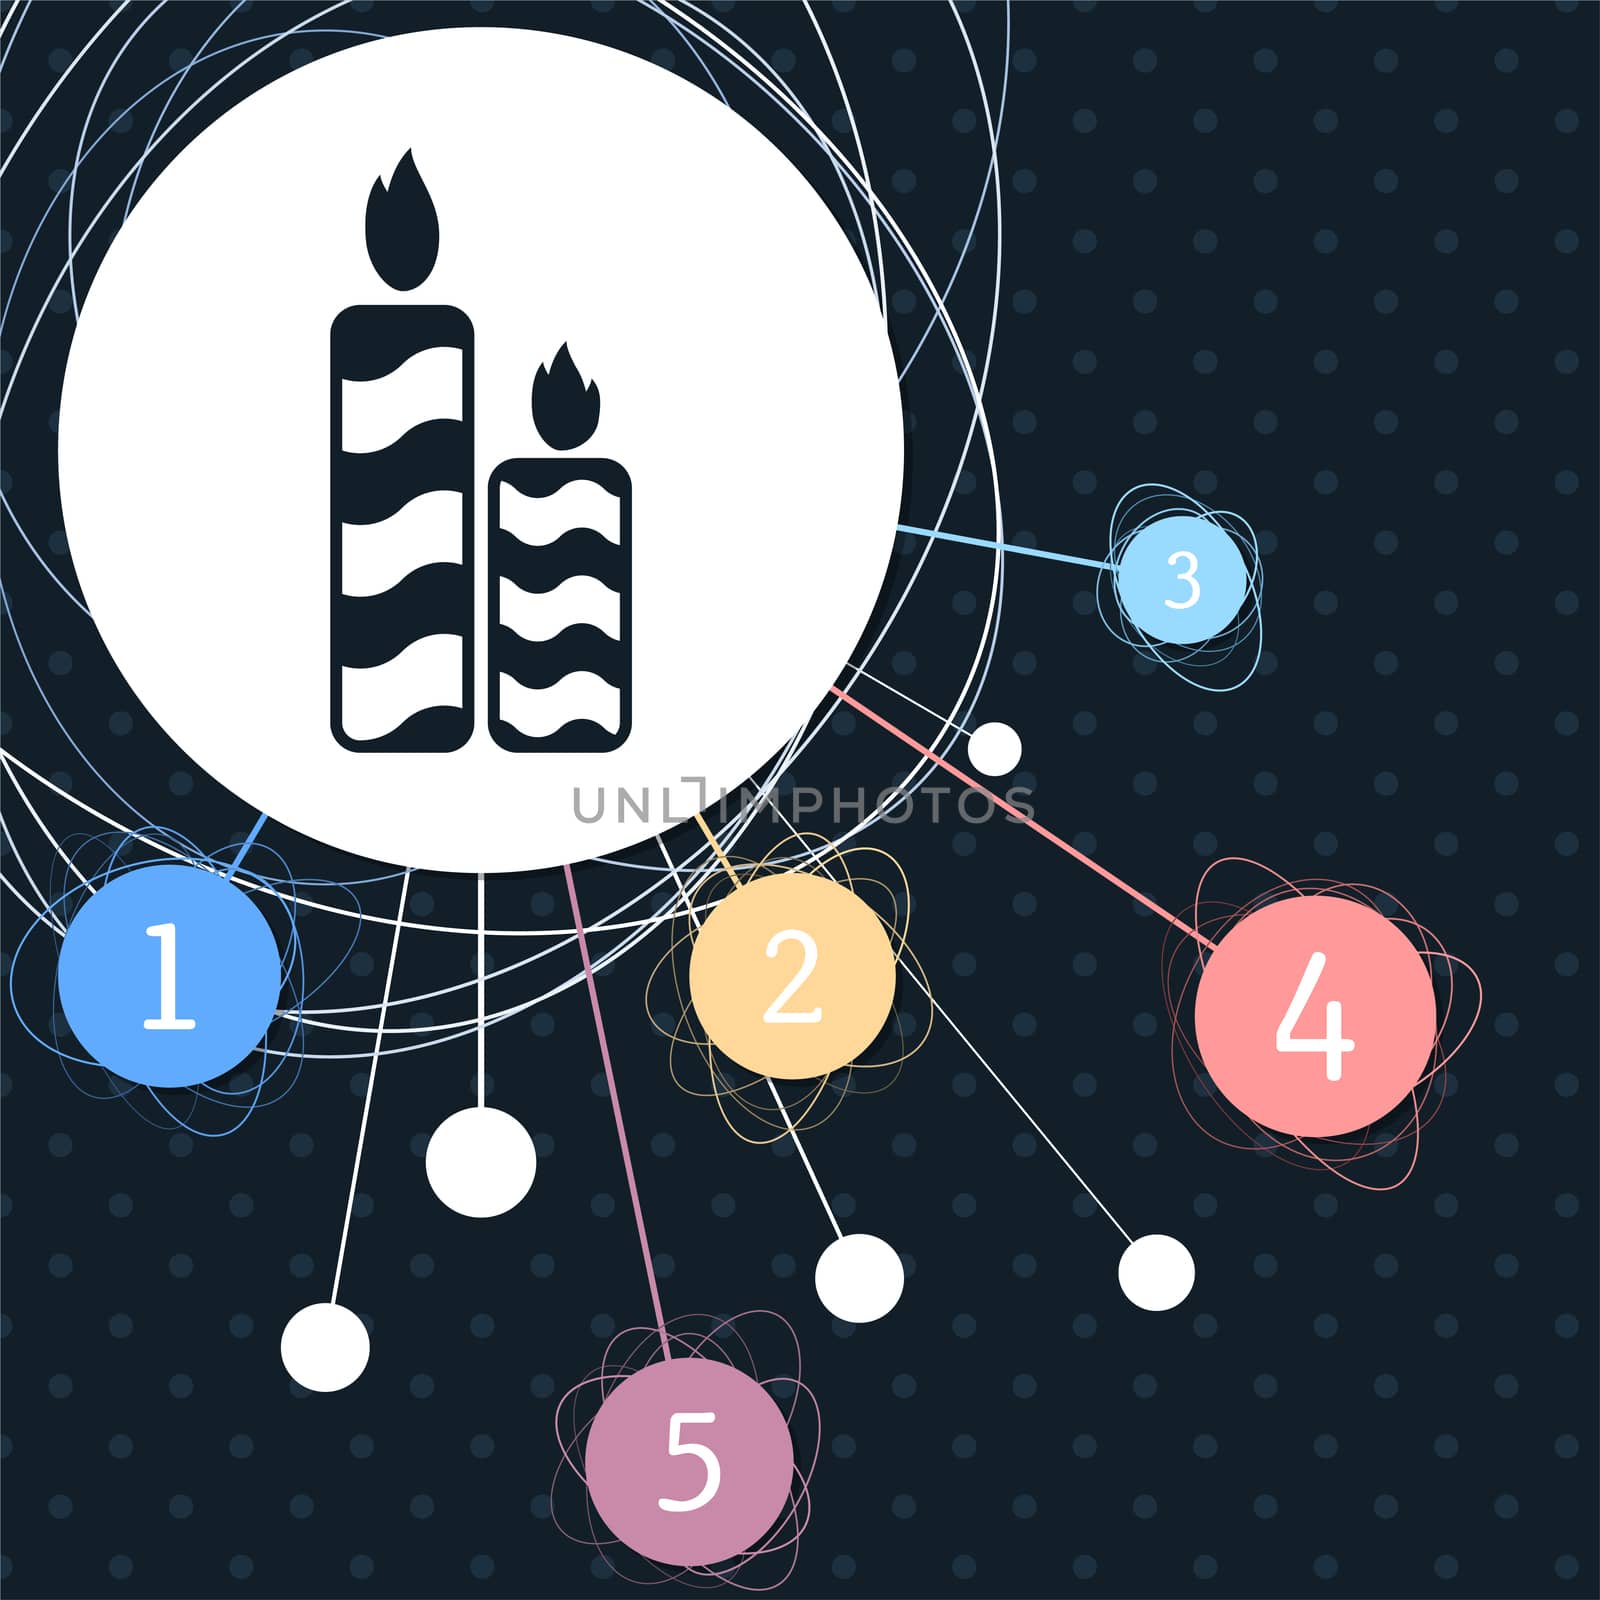 Candle icon with the background to the point and with infographic style. illustration